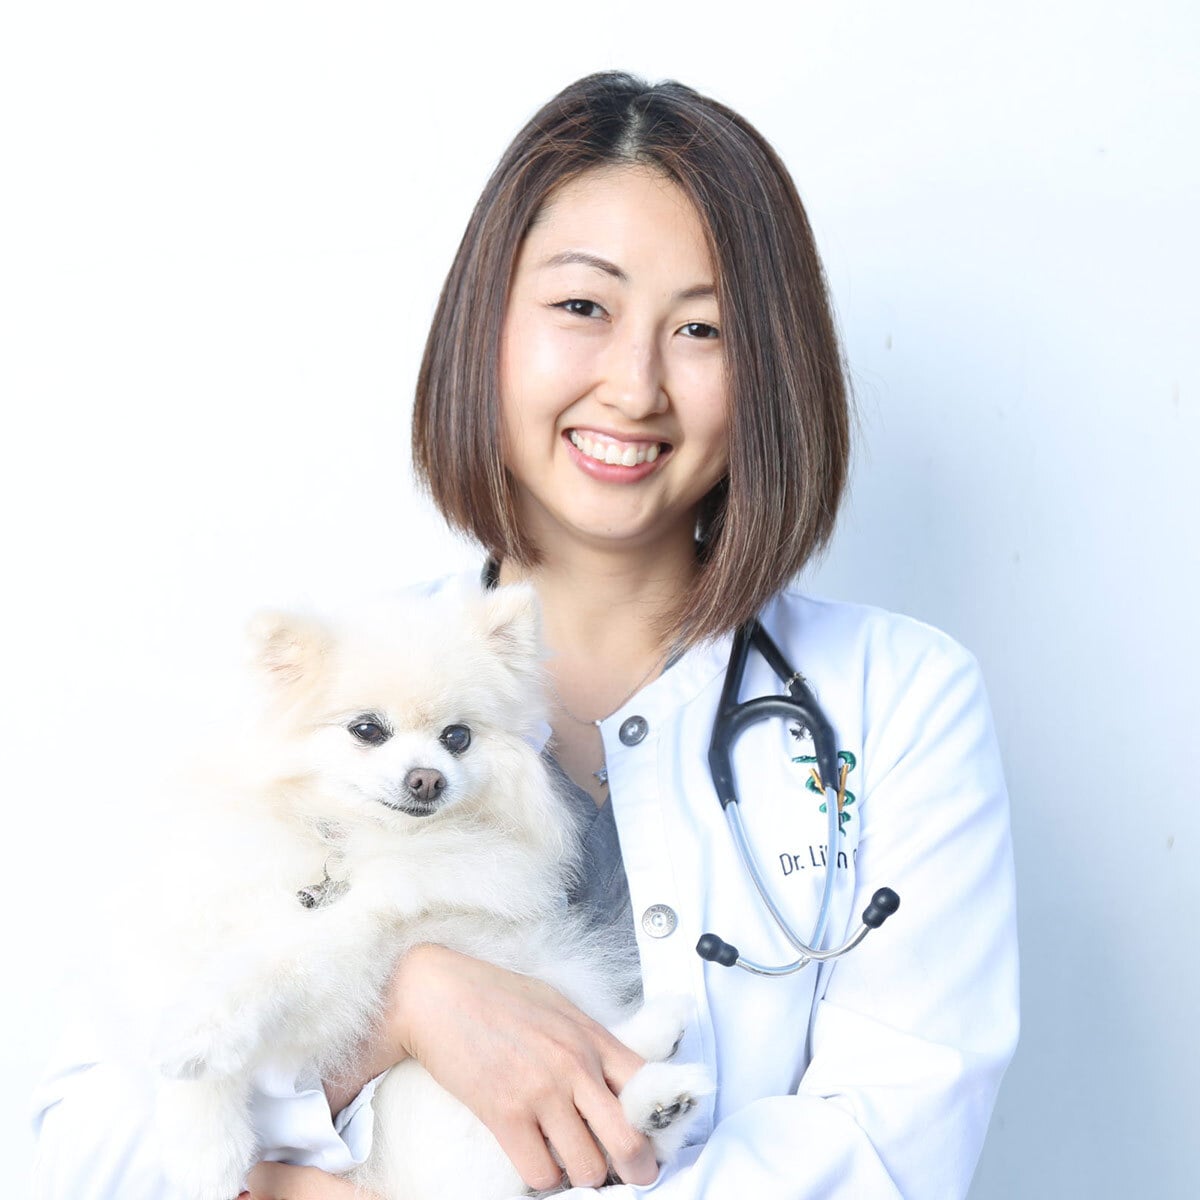 Dr Lily Chen